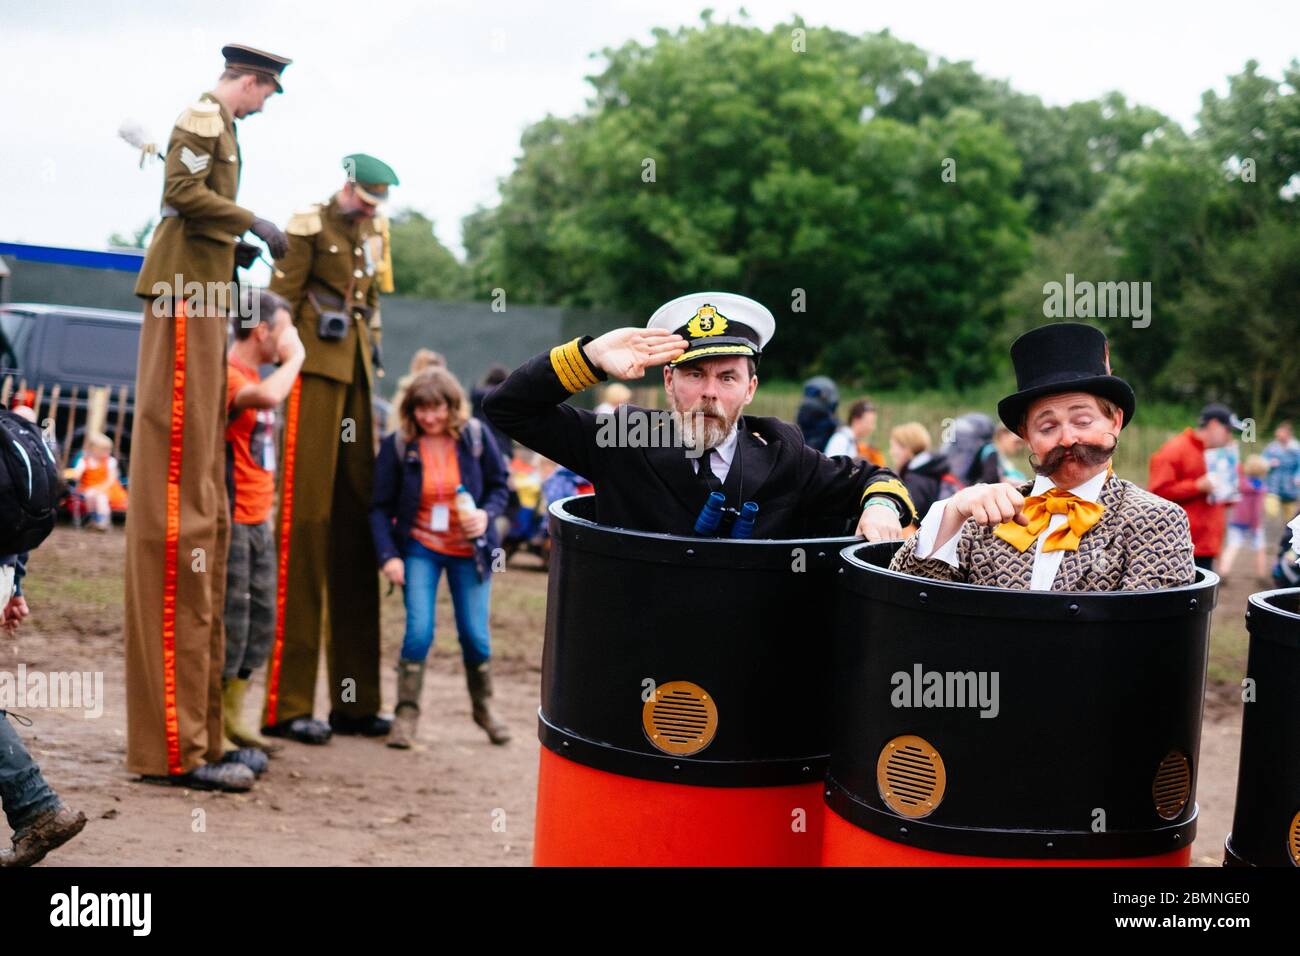 Missing Link Productions' Funnels, walkabout act in the Theatre & Circus area, with The Sergeant Majors stiltwalkers in the background   Glastonbury F Stock Photo